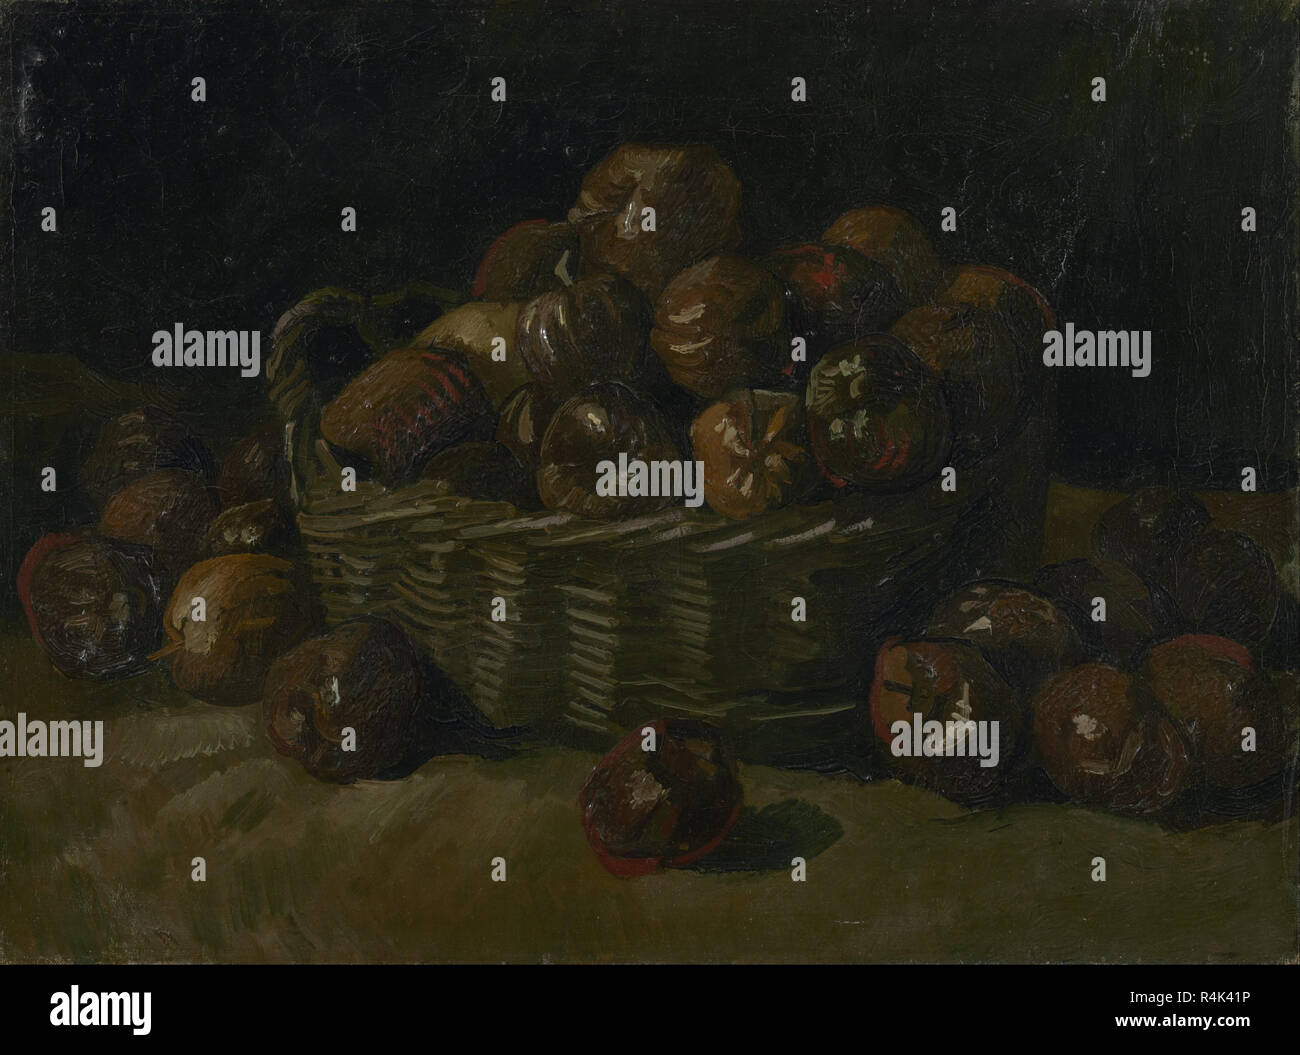 Basket of apples. Date/Period: September 1885 - 1885. Still life. Oil on canvas. Height: 40.5 cm (15.9 in); Width: 60.4 cm (23.7 in). Author: VINCENT VAN GOGH. Stock Photo